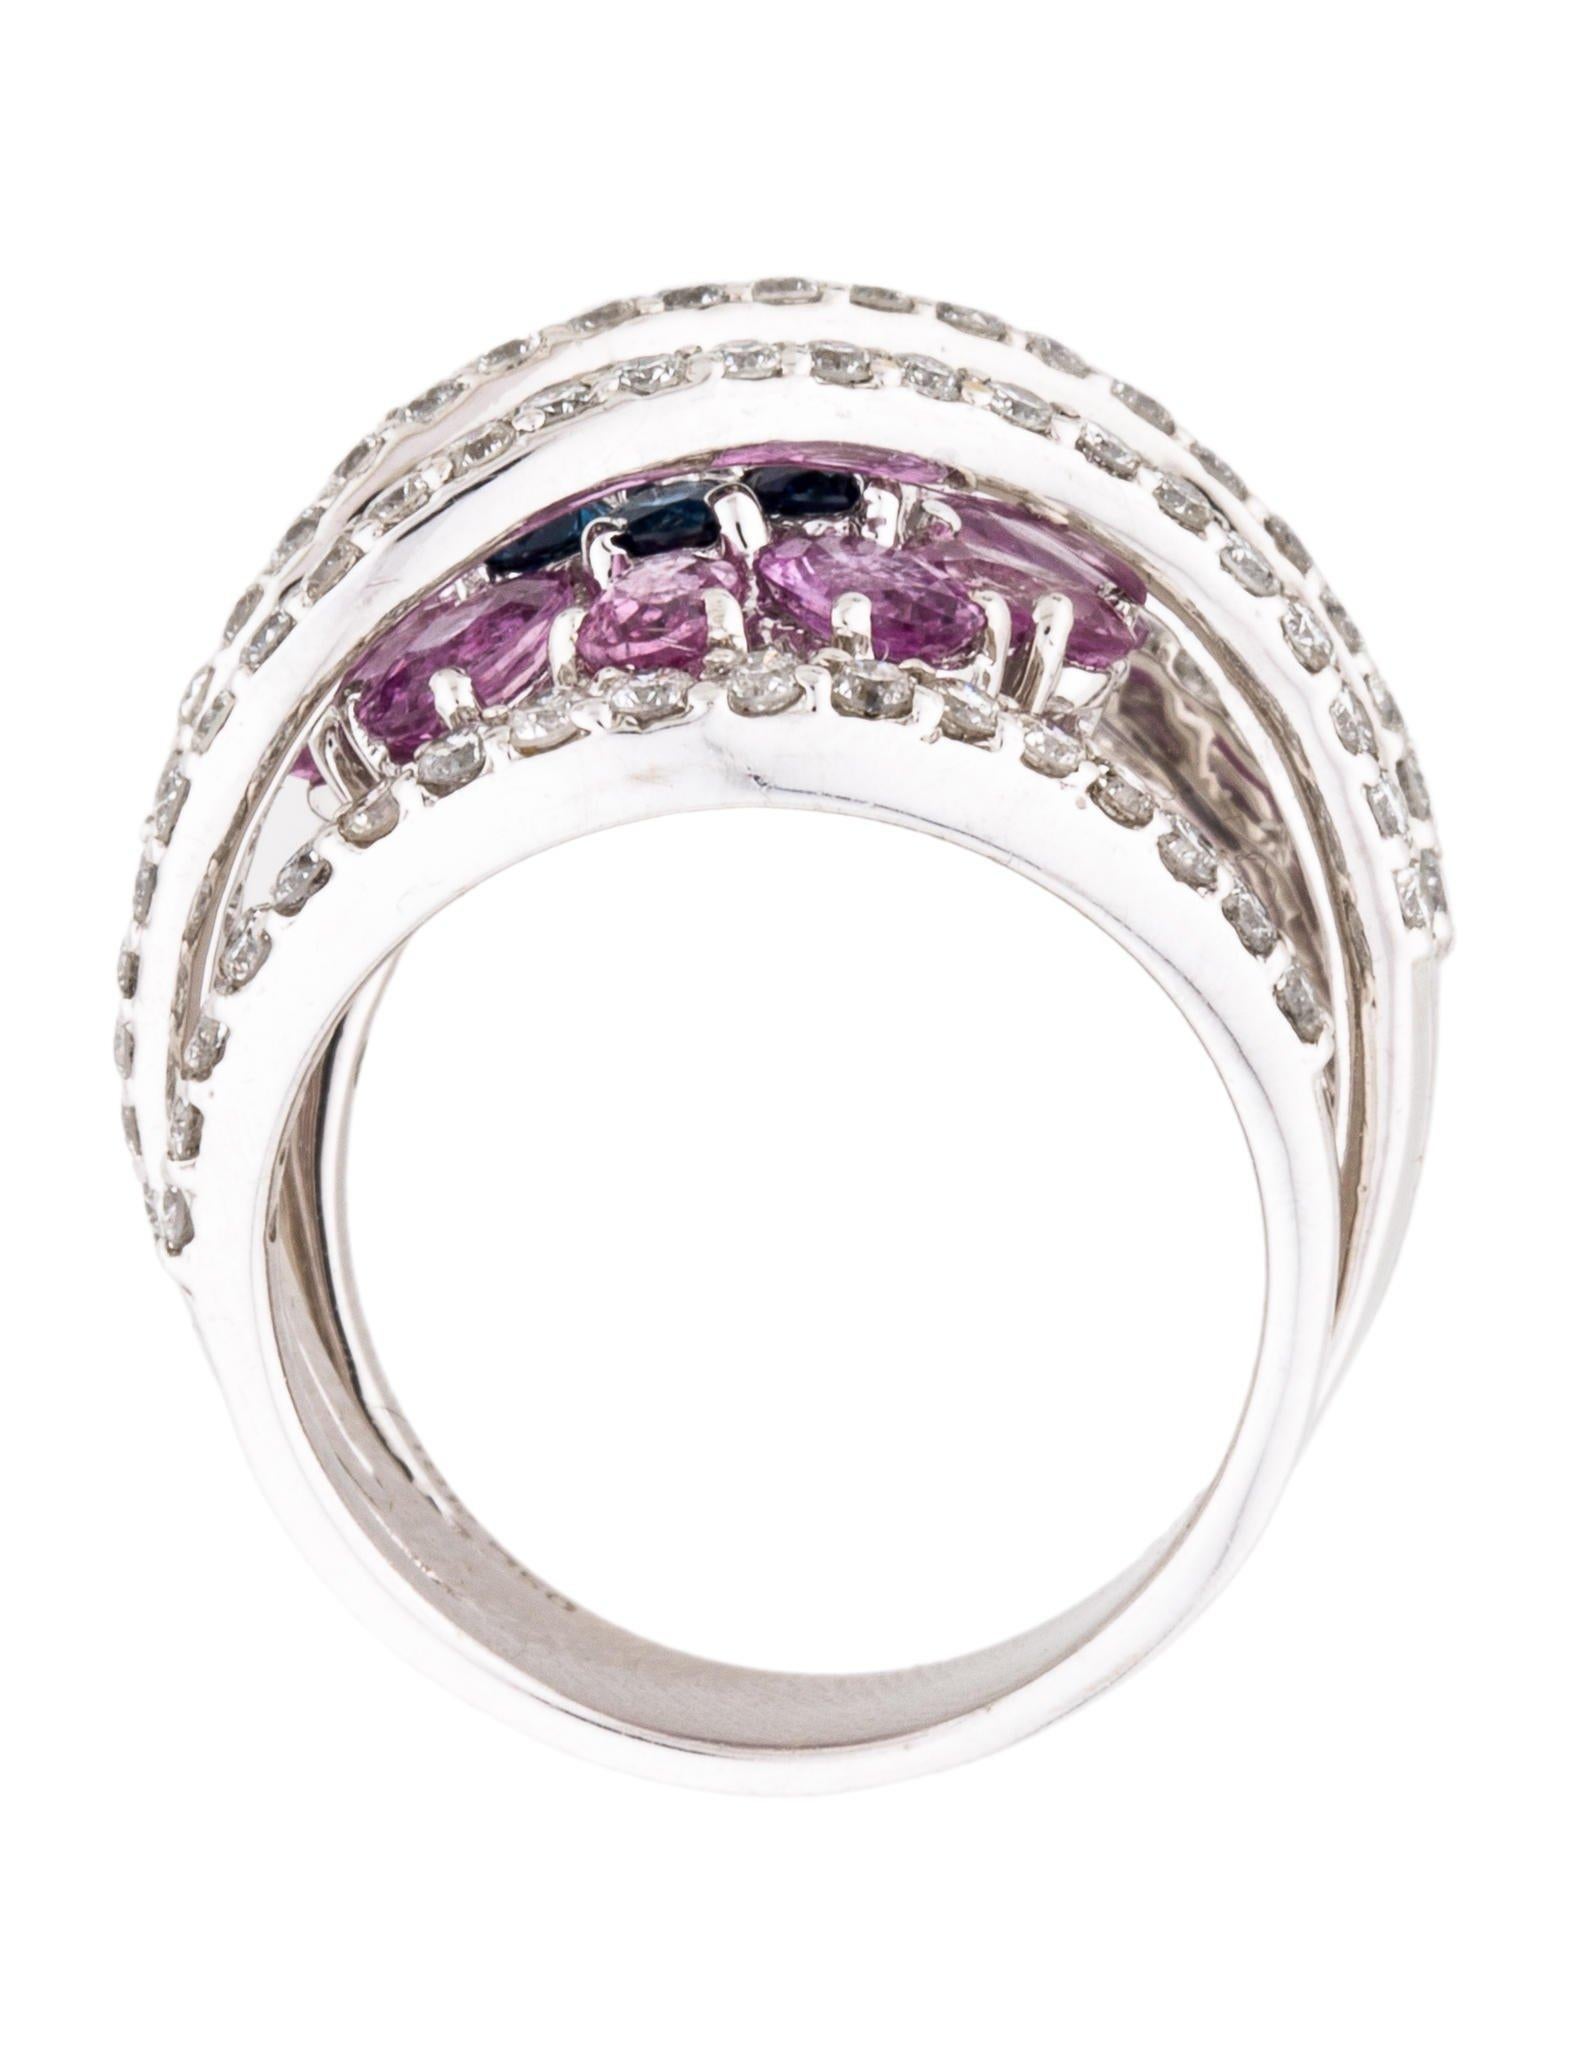 18K white gold band featuring 1.66 carats of round brilliant diamonds and 2.98 carats of pink and blue sapphire.

Ring Size: 7
Metal Type: 18K White Gold
Hallmark: 18K, 750
Location: Inside Shank
Metal Finish: High Polish
Total Item Weight (g):